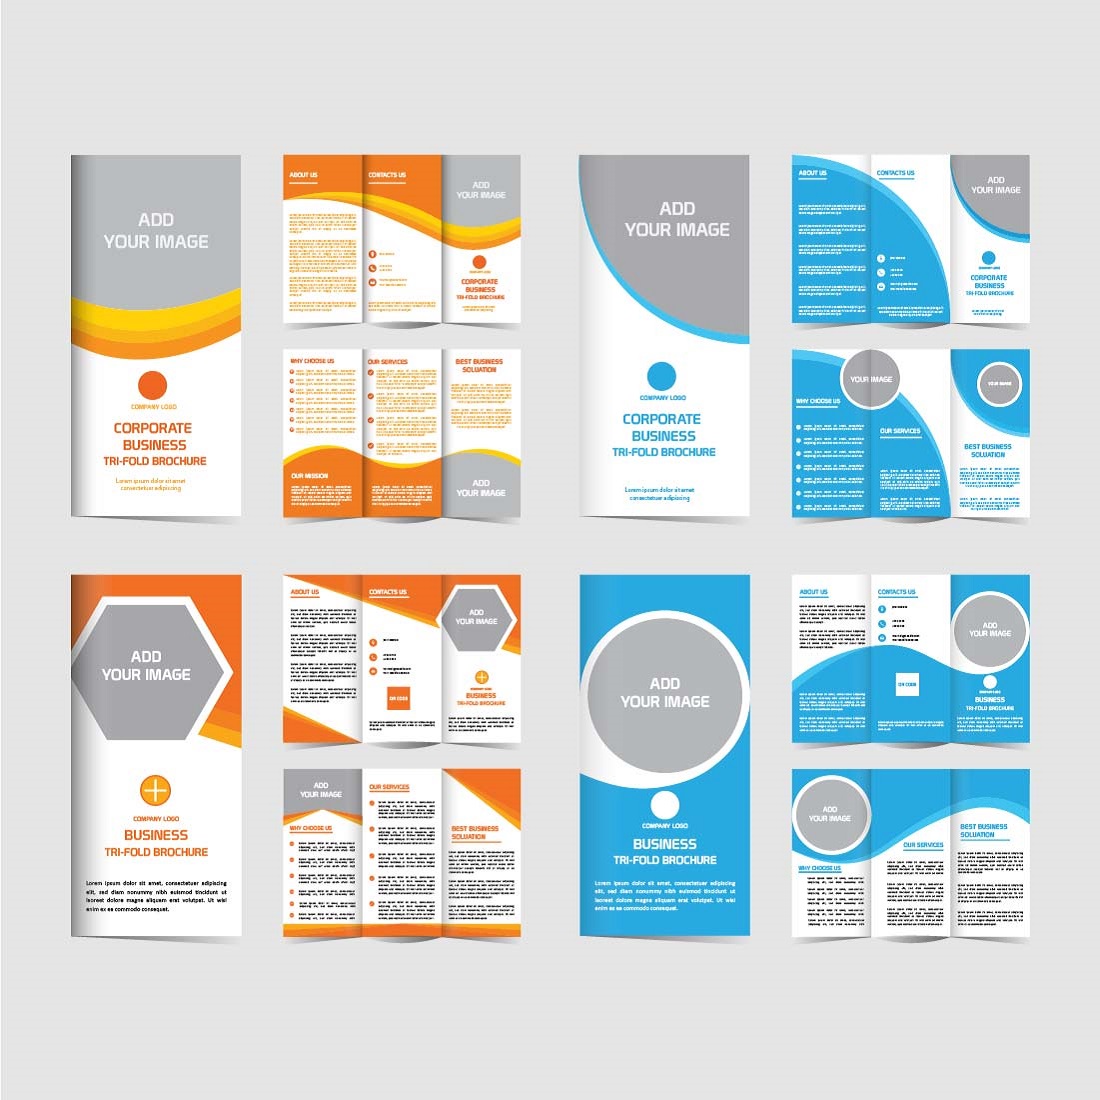 Corporate business trifold brochure design set editable and resizable cover image.